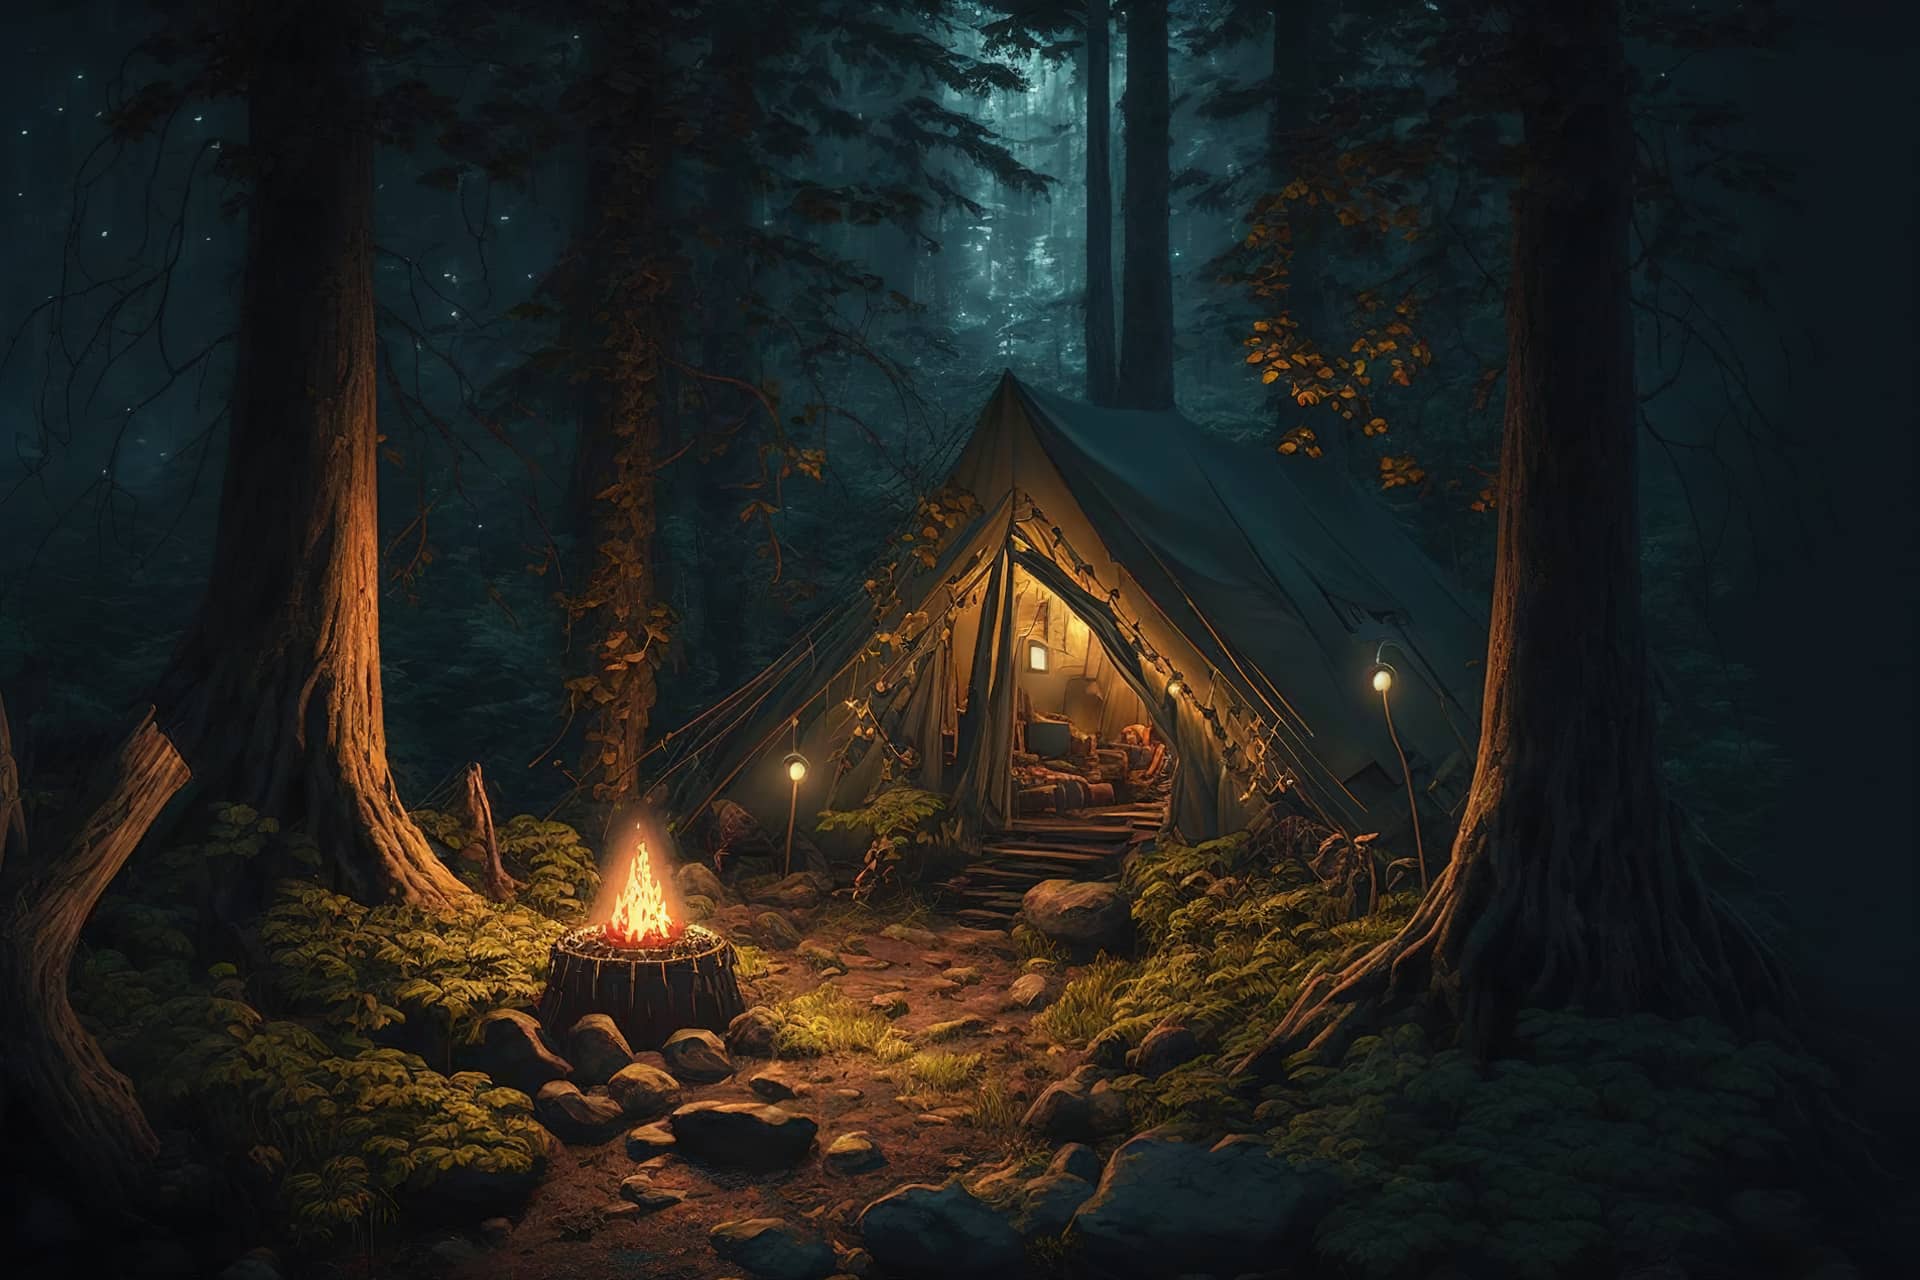 Camping night forest with camp fire fine picture